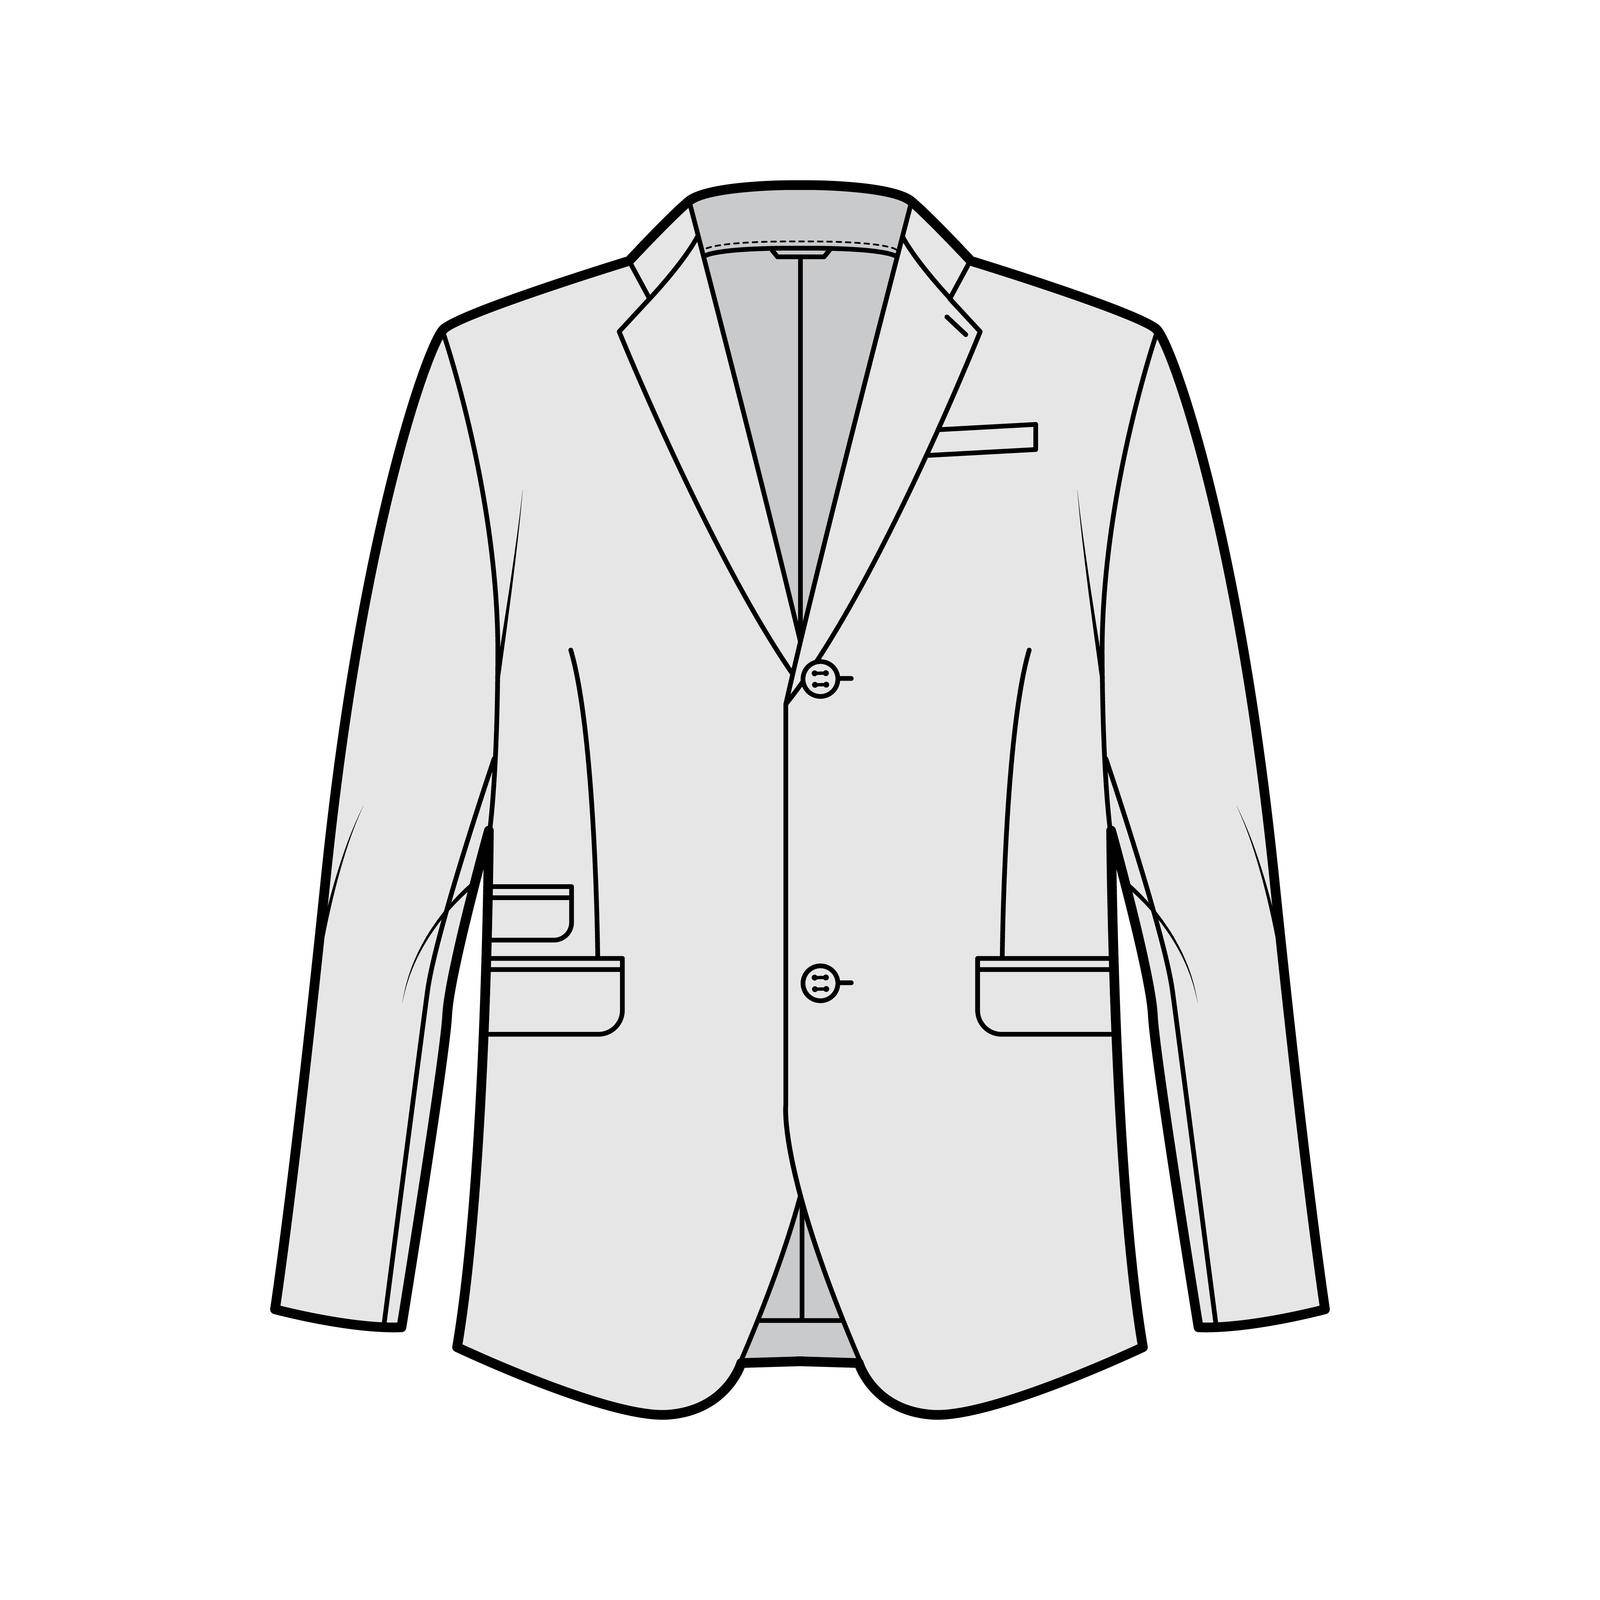 Tailored jacket lounge suit technical fashion illustration with long sleeves, notched lapel collar, flap went pockets. Flat coat template front, grey color style. Women, men, unisex top CAD mockup